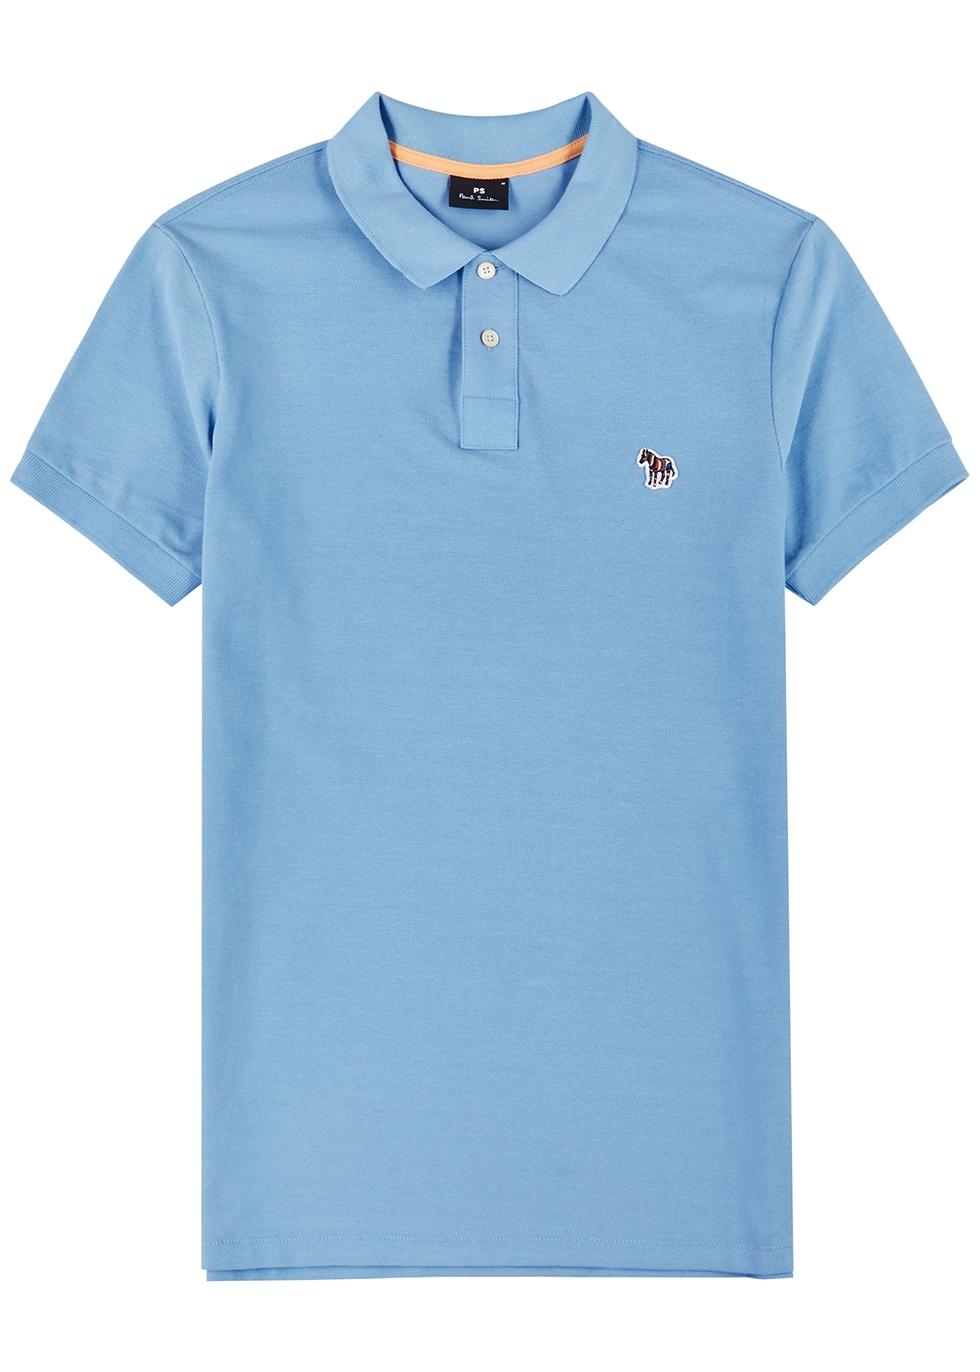 PS by Paul Smith Logo Piqué Cotton Polo Shirt in Blue for Men | Lyst